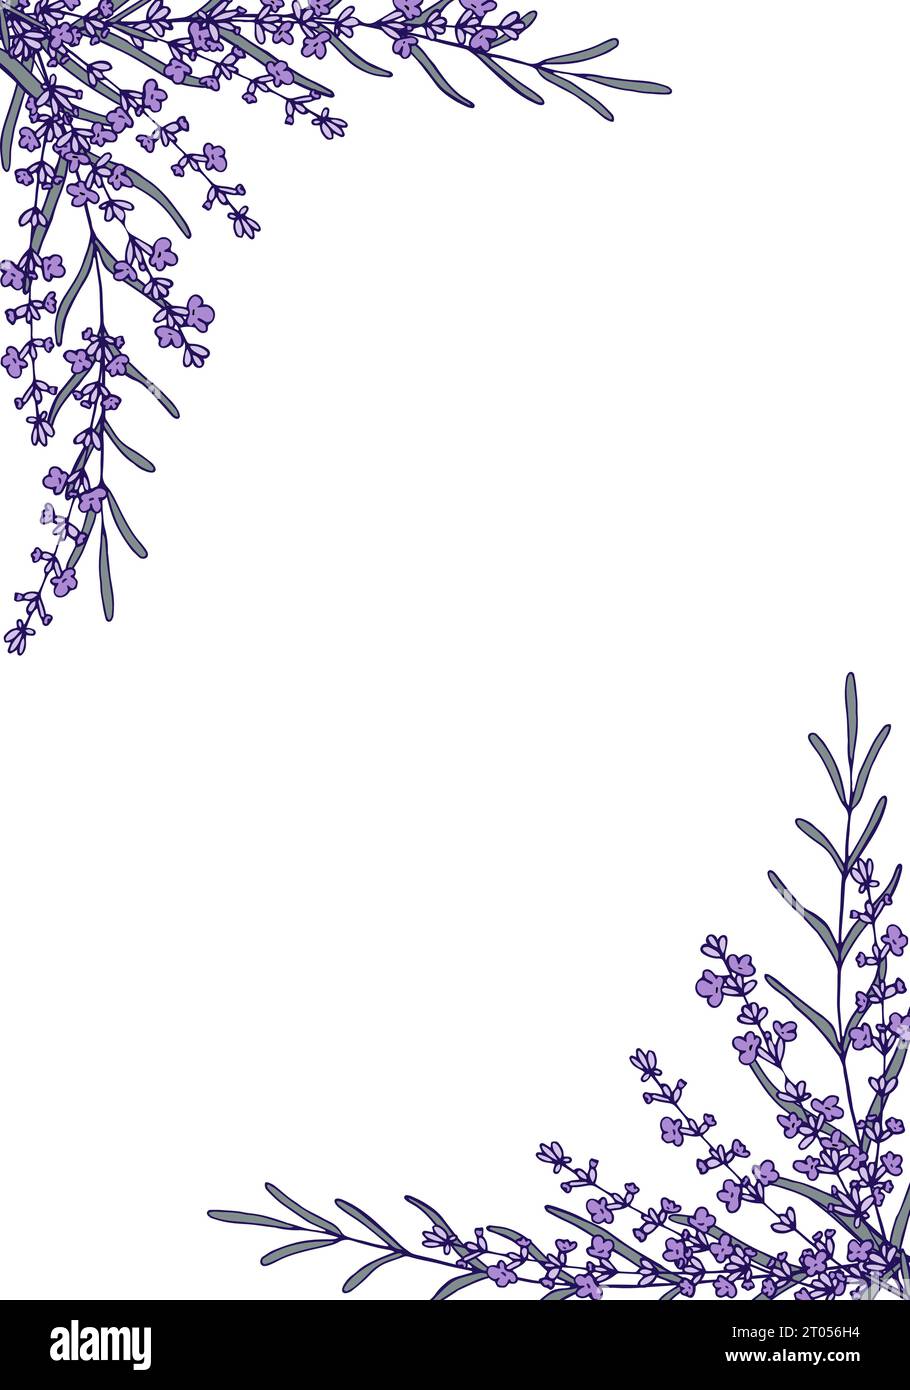 Lavender branch flower frame. Hand drawn vector design for greeting cards, save the date, invitations Stock Vector